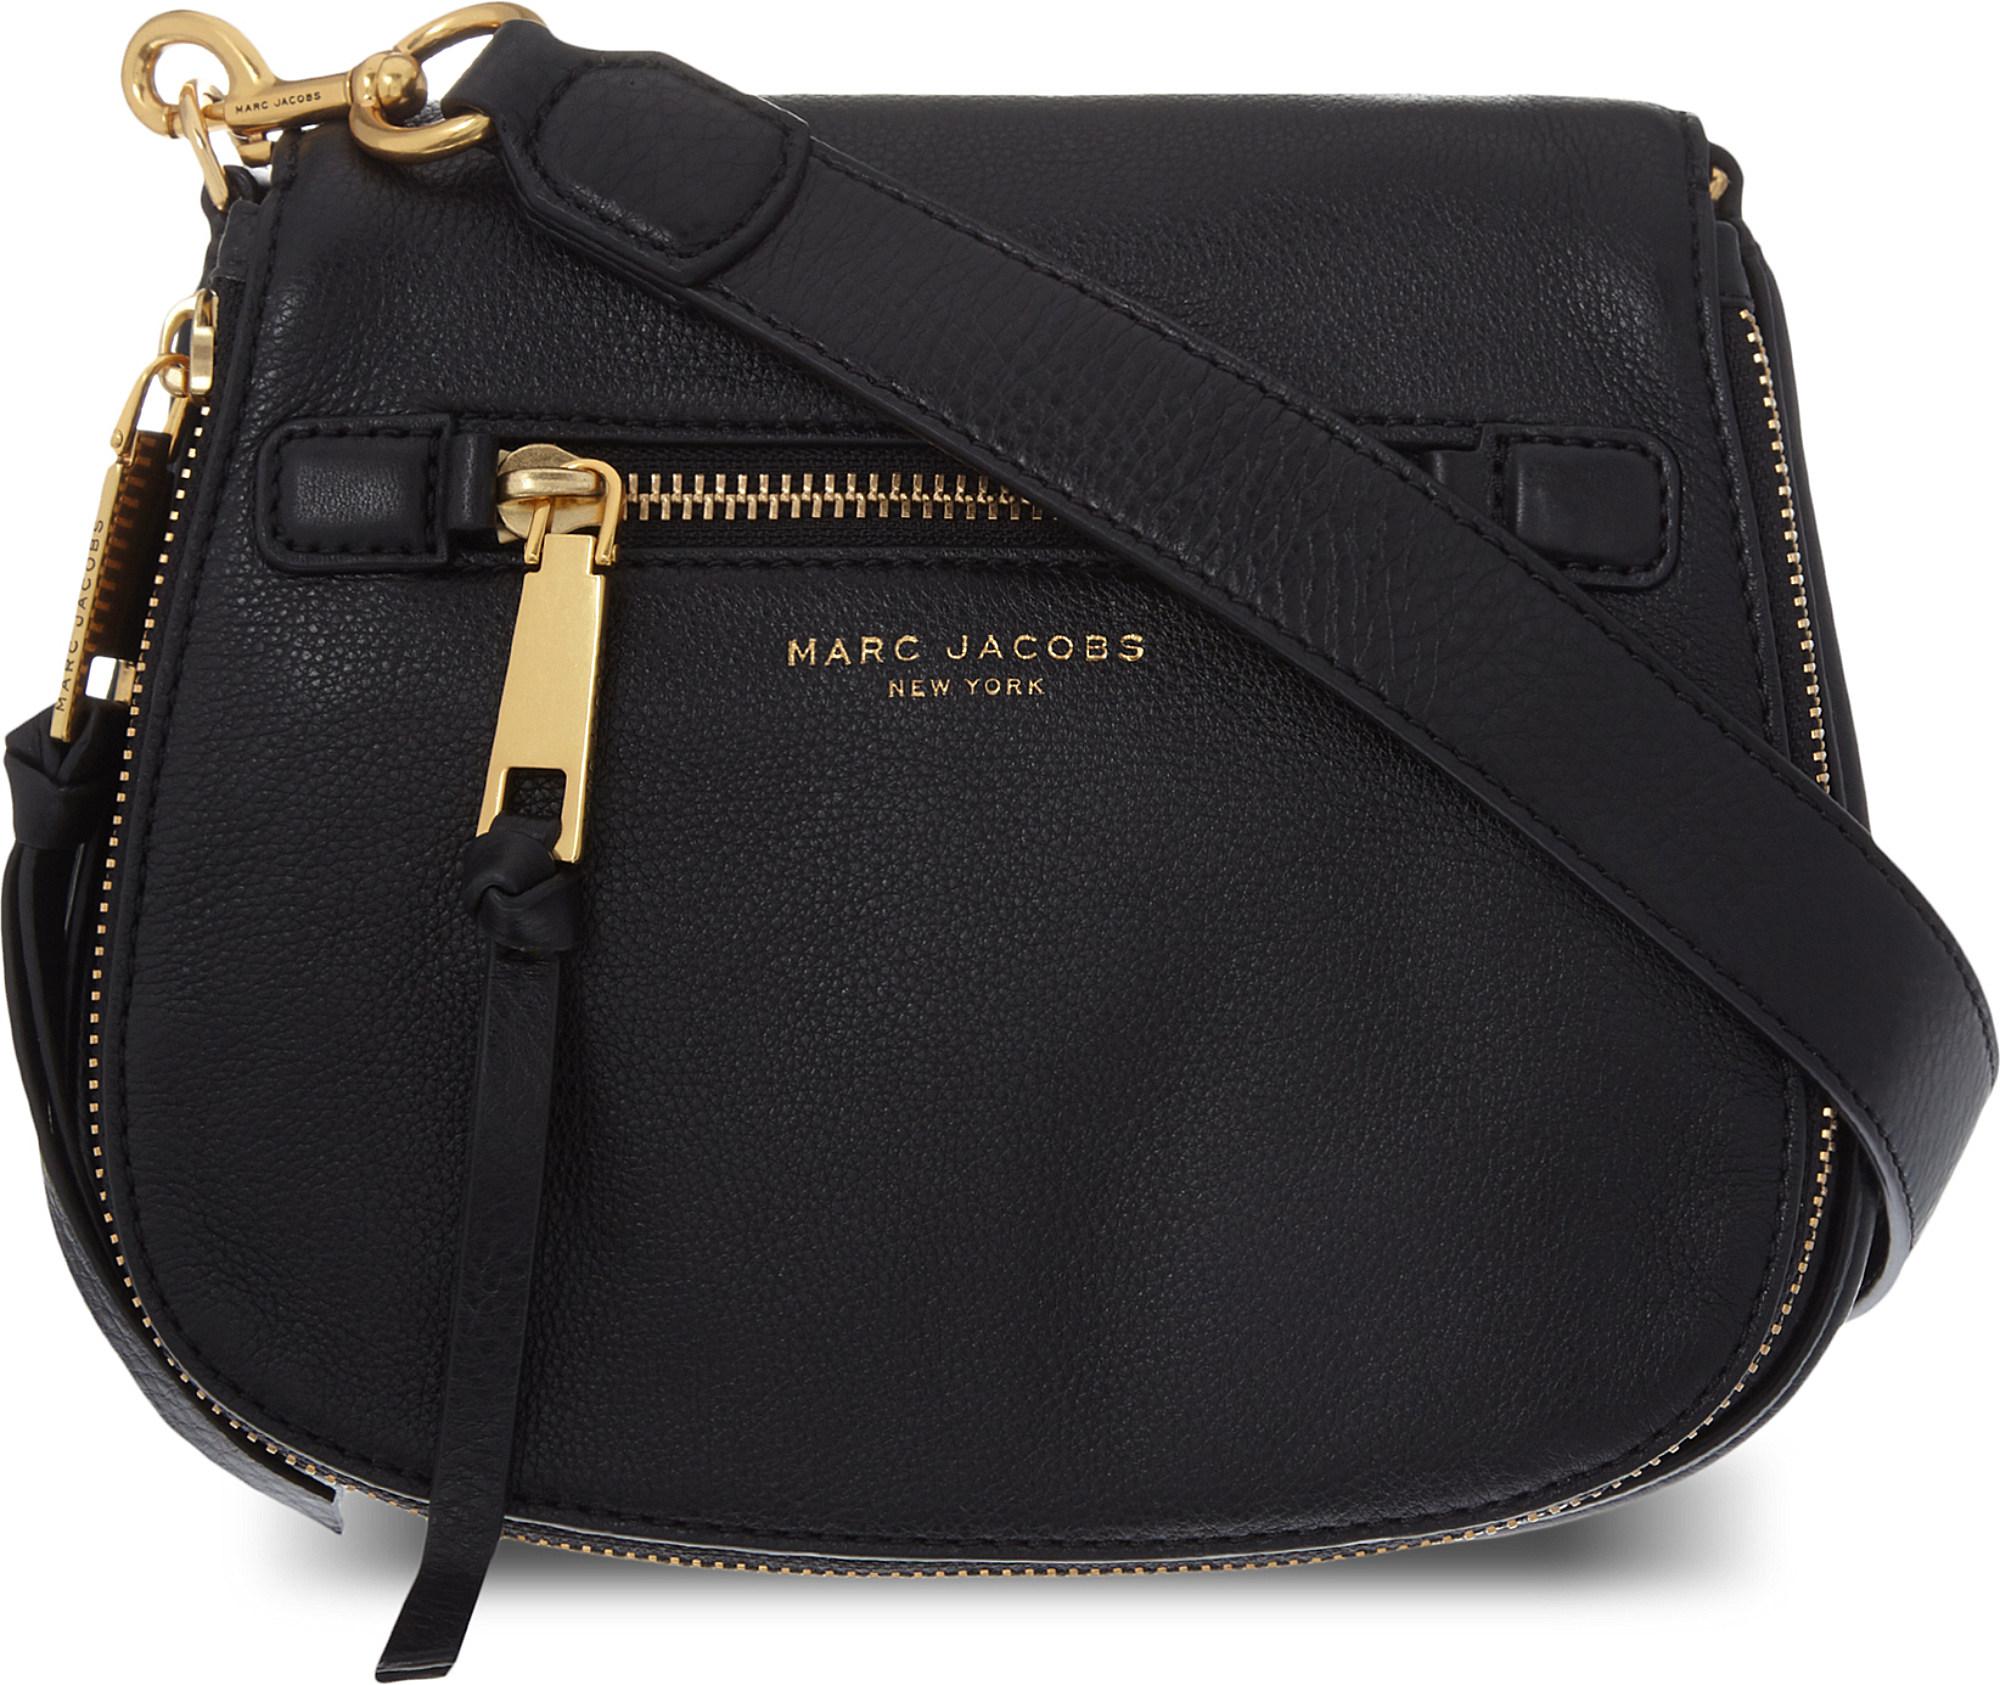 Marc Jacobs Recruit Small Grained Leather Saddle Bag in Black - Lyst